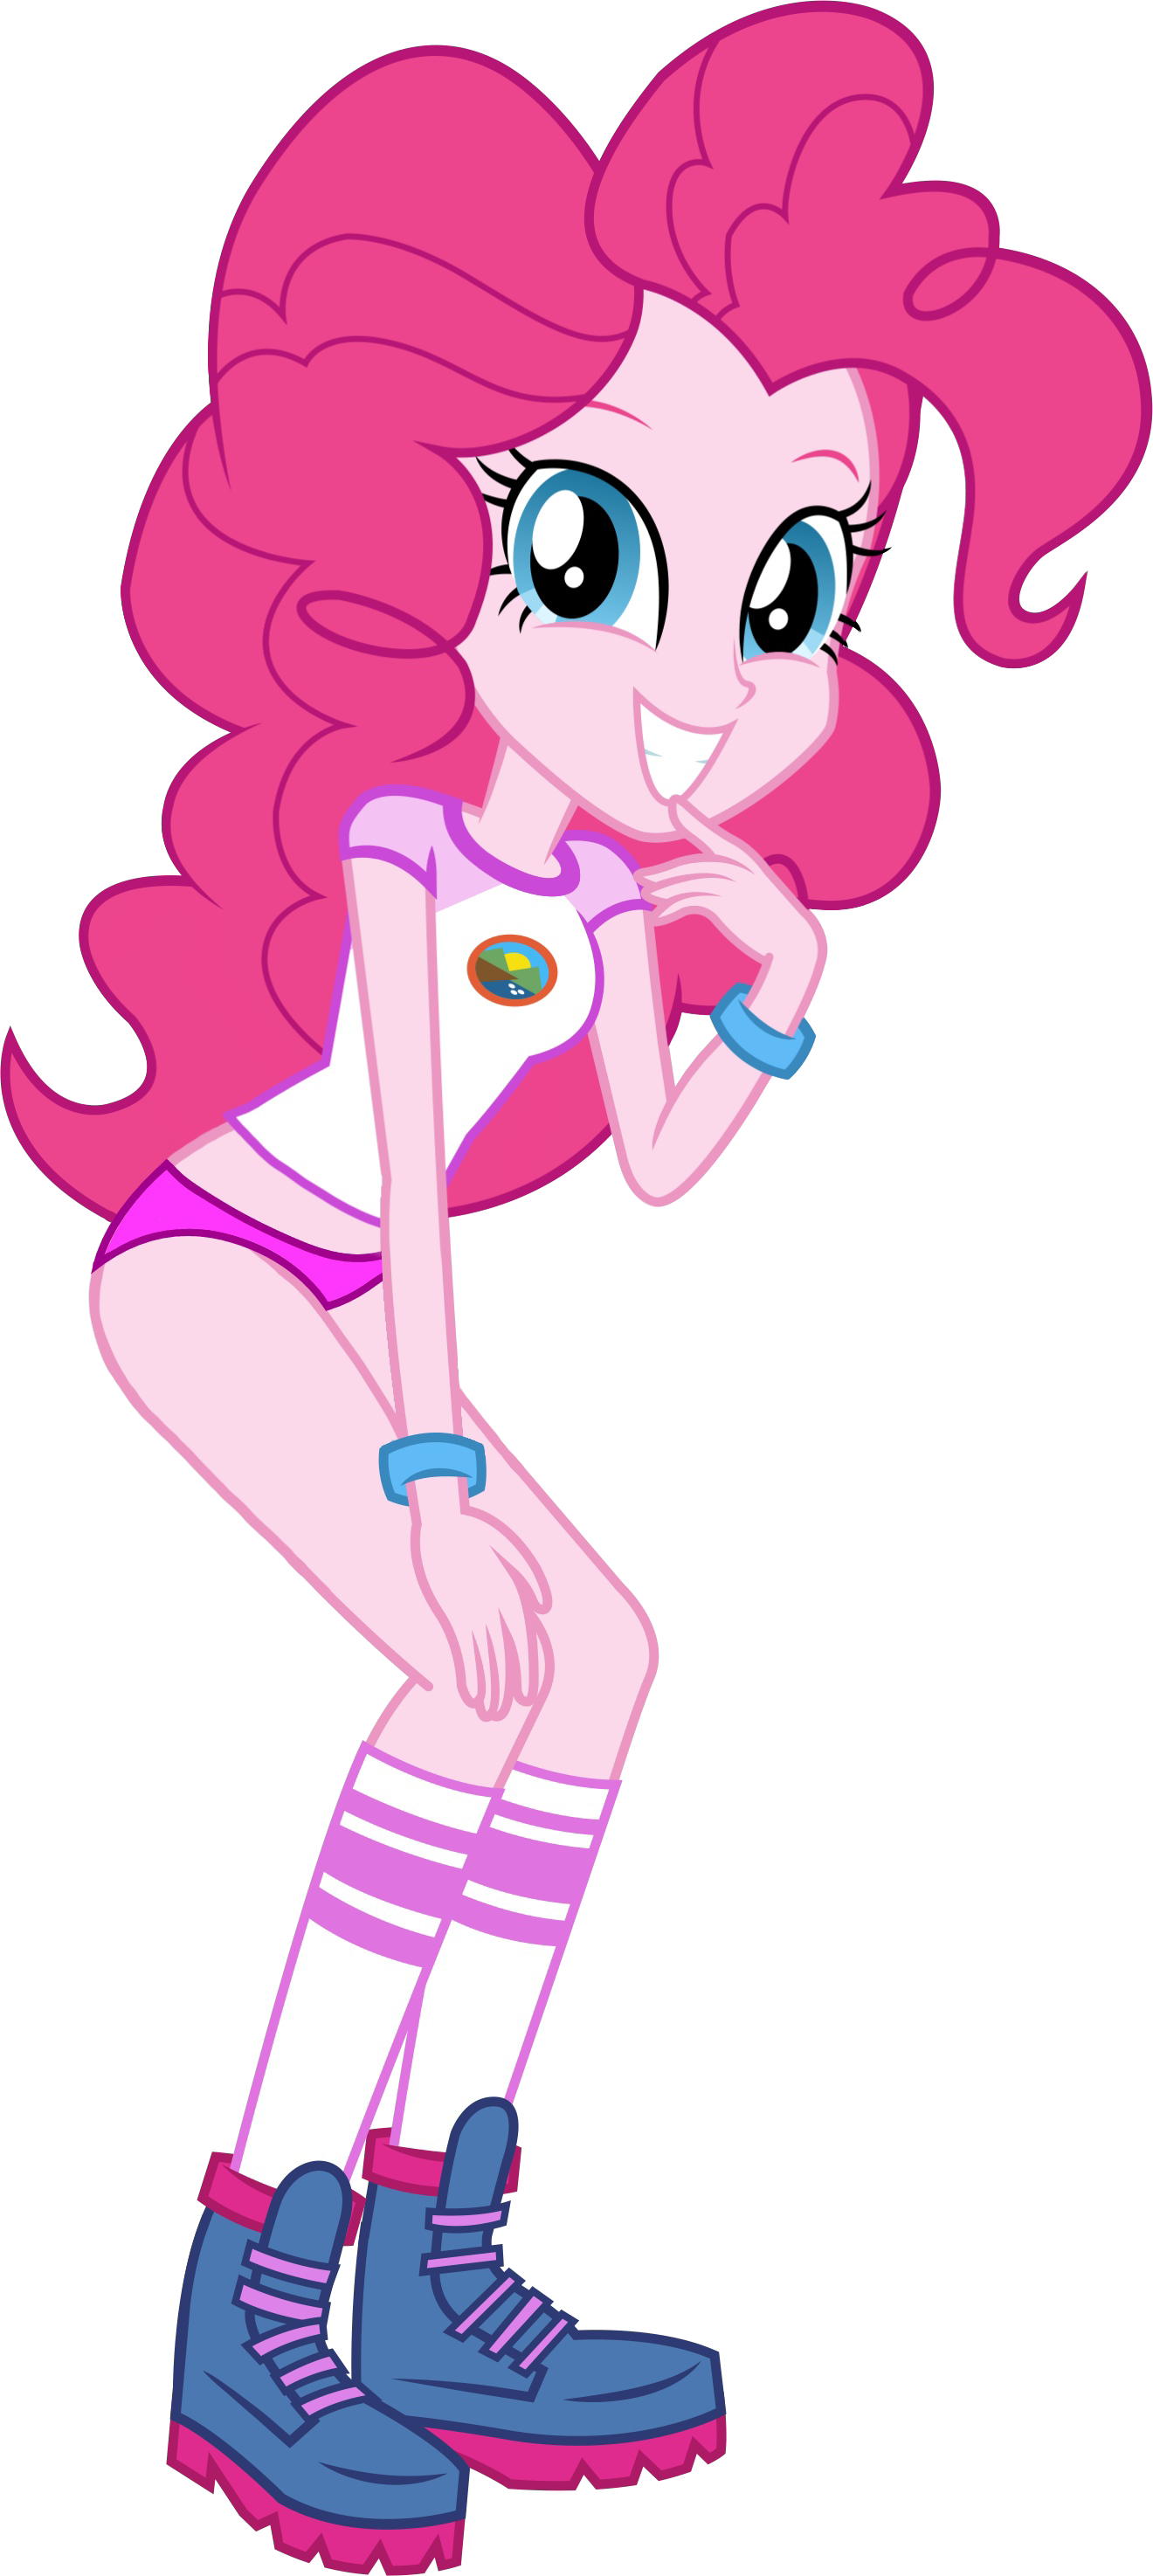 1430849__suggestive_artist-colon-astroboy84_edit_pinkie+pie_equestria+girls_legend+of+everfree_attractive_black+background_boots_bracelet_breasts_campe.png